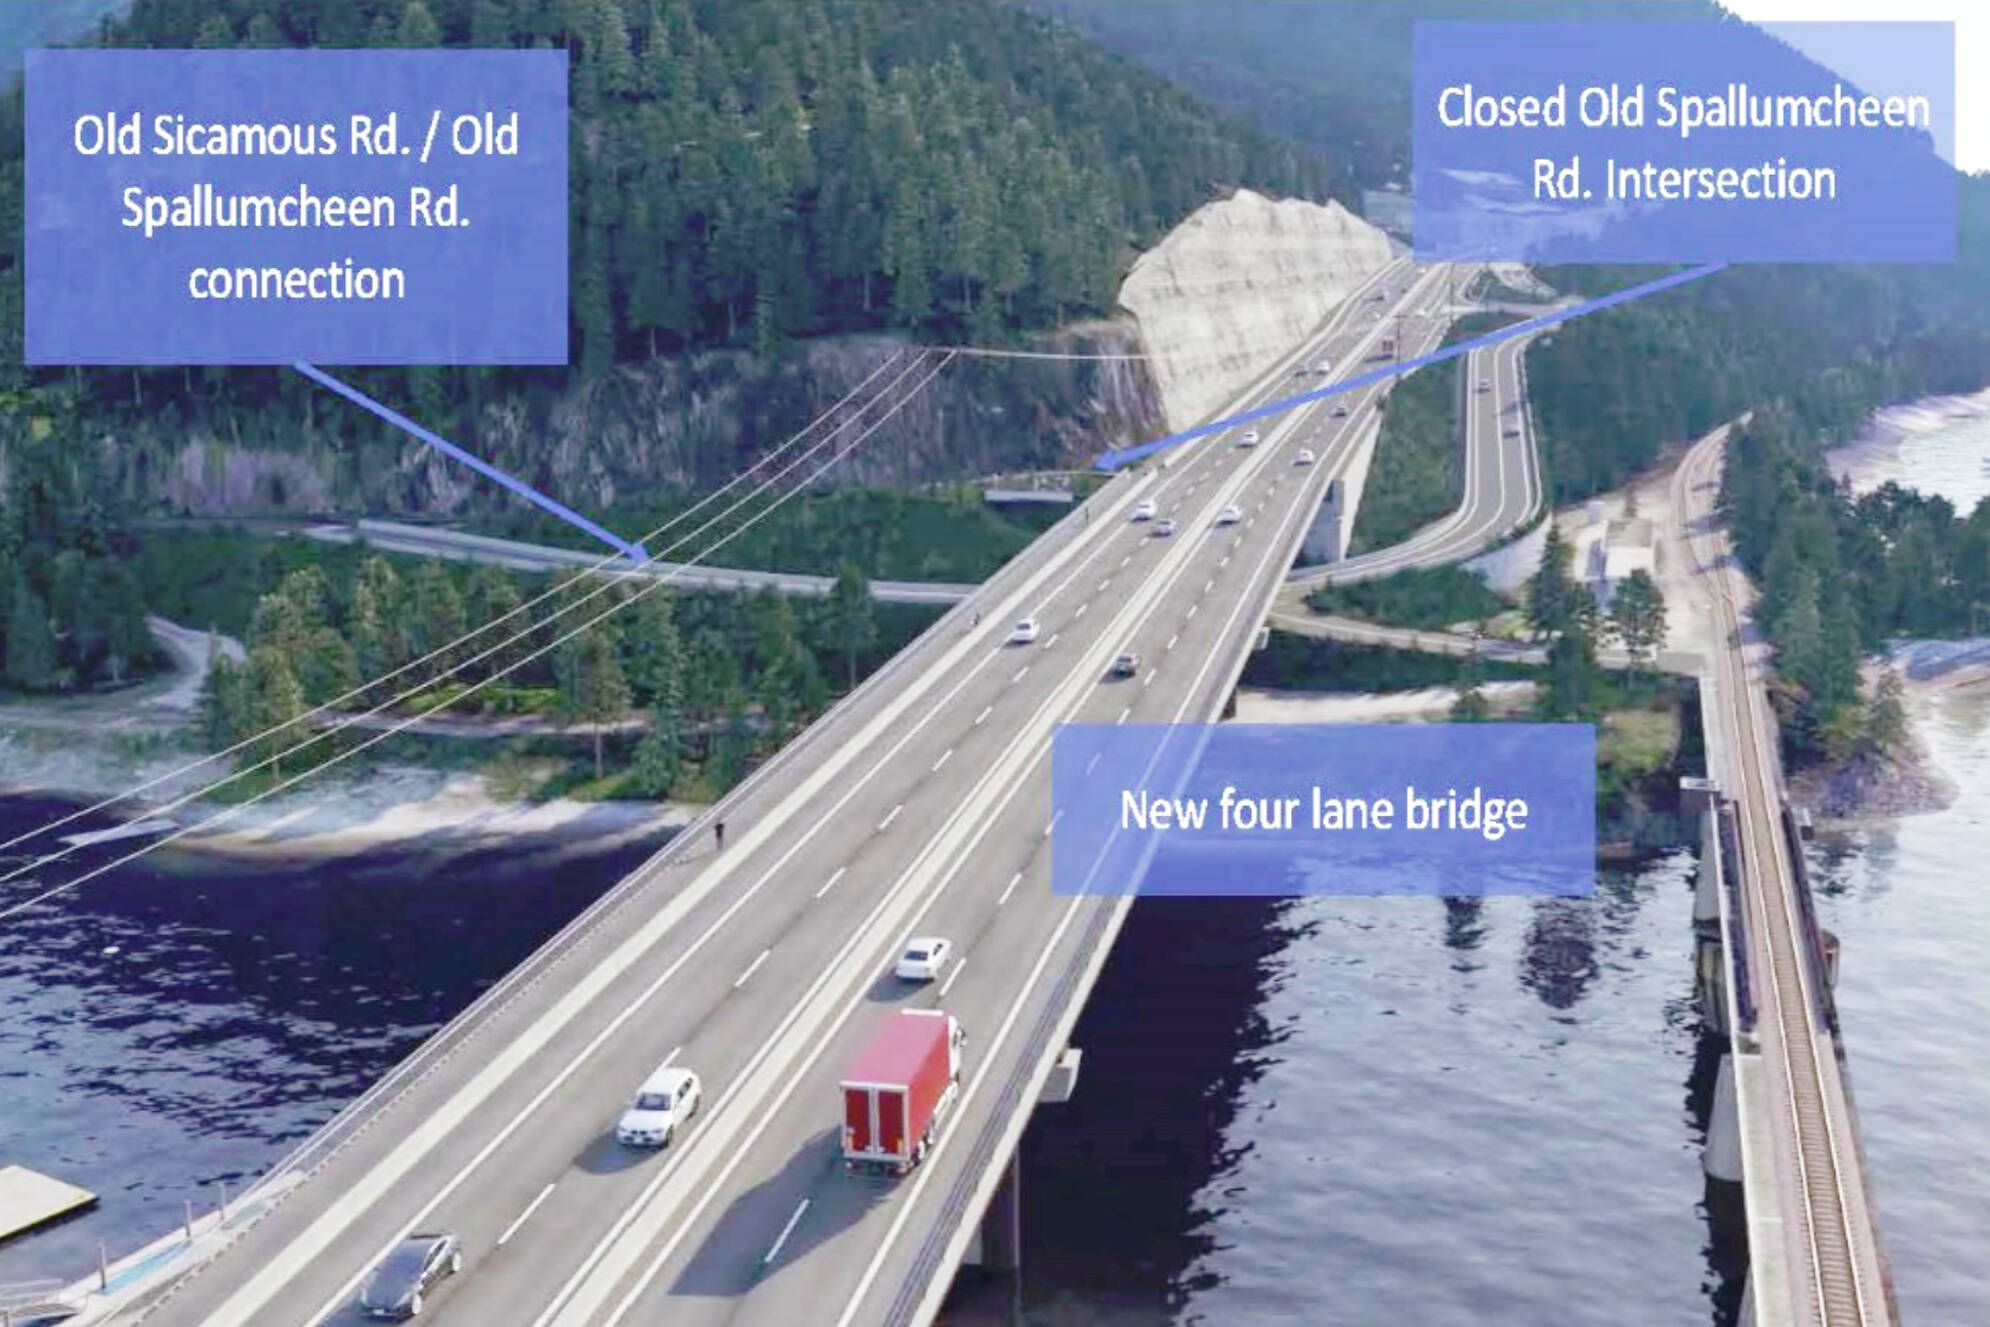 Concept still of the R.W. Bruhn Bridge replacement project, showing the new four-lane bridge and new connection at old Sicamous Road and Old Spallumcheen Road. (Province of British Columbia image)